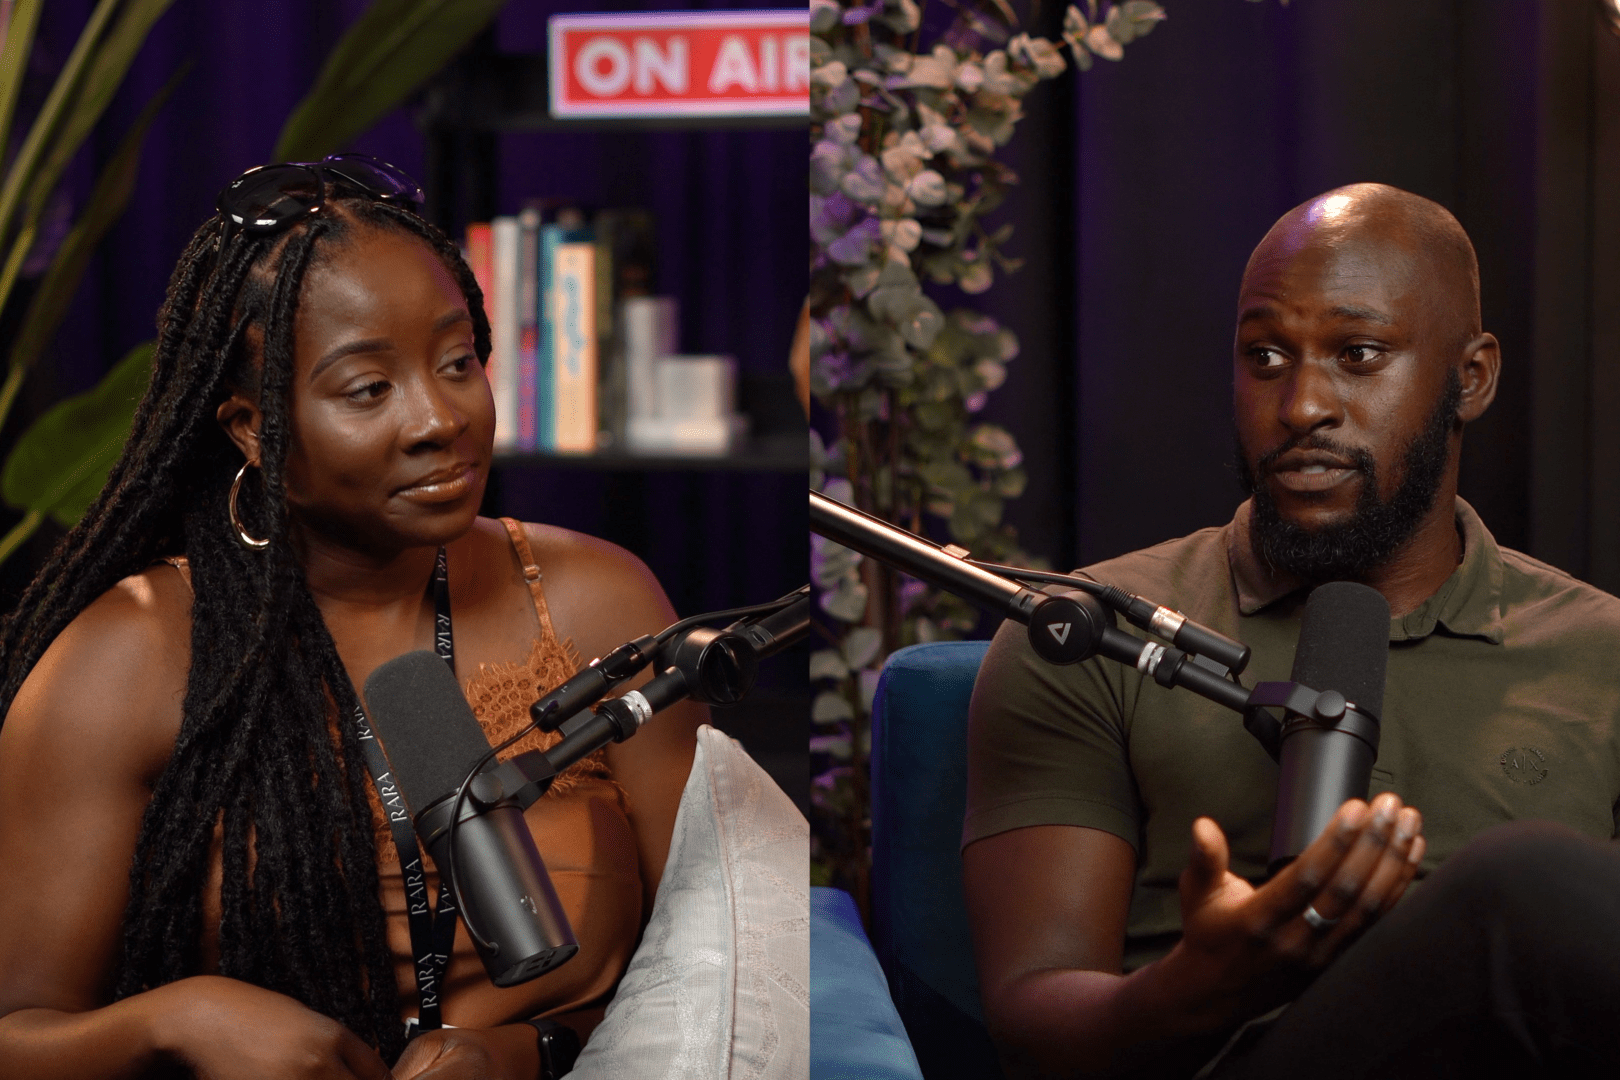 A photo of a black man and black woman having a discussion on a podcast